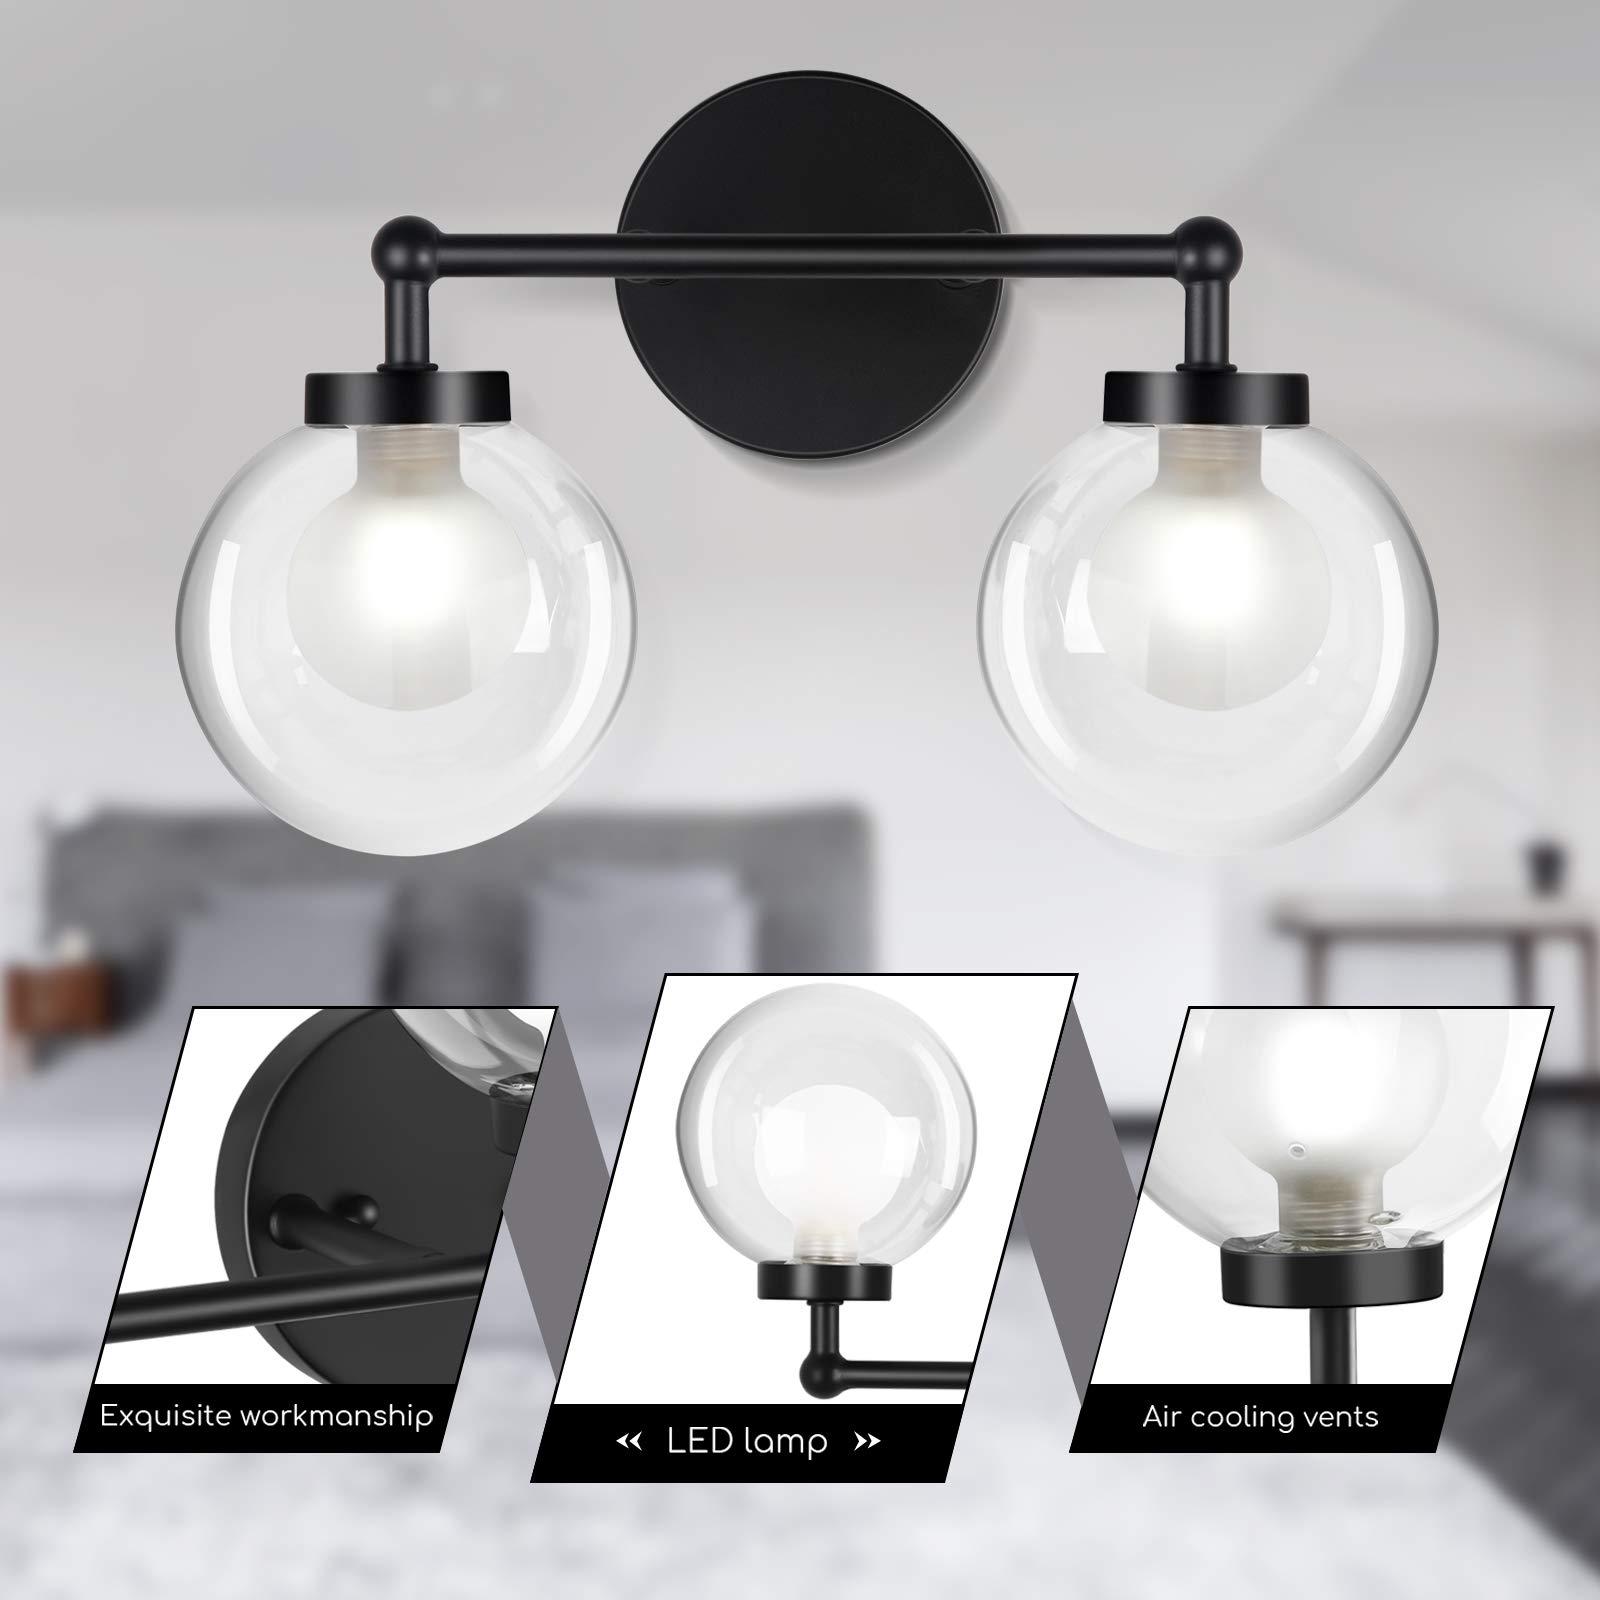 Bathroom Light Fixtures, 2 Light Matte Black Vanity Light Wall Sconce light with 2 G9 Led bulb with Glass Shade, 3.15 Inch 650LM Modern Wall Lamp for Bath Vanity Living Room Hallway Kitchen Bar Stairs